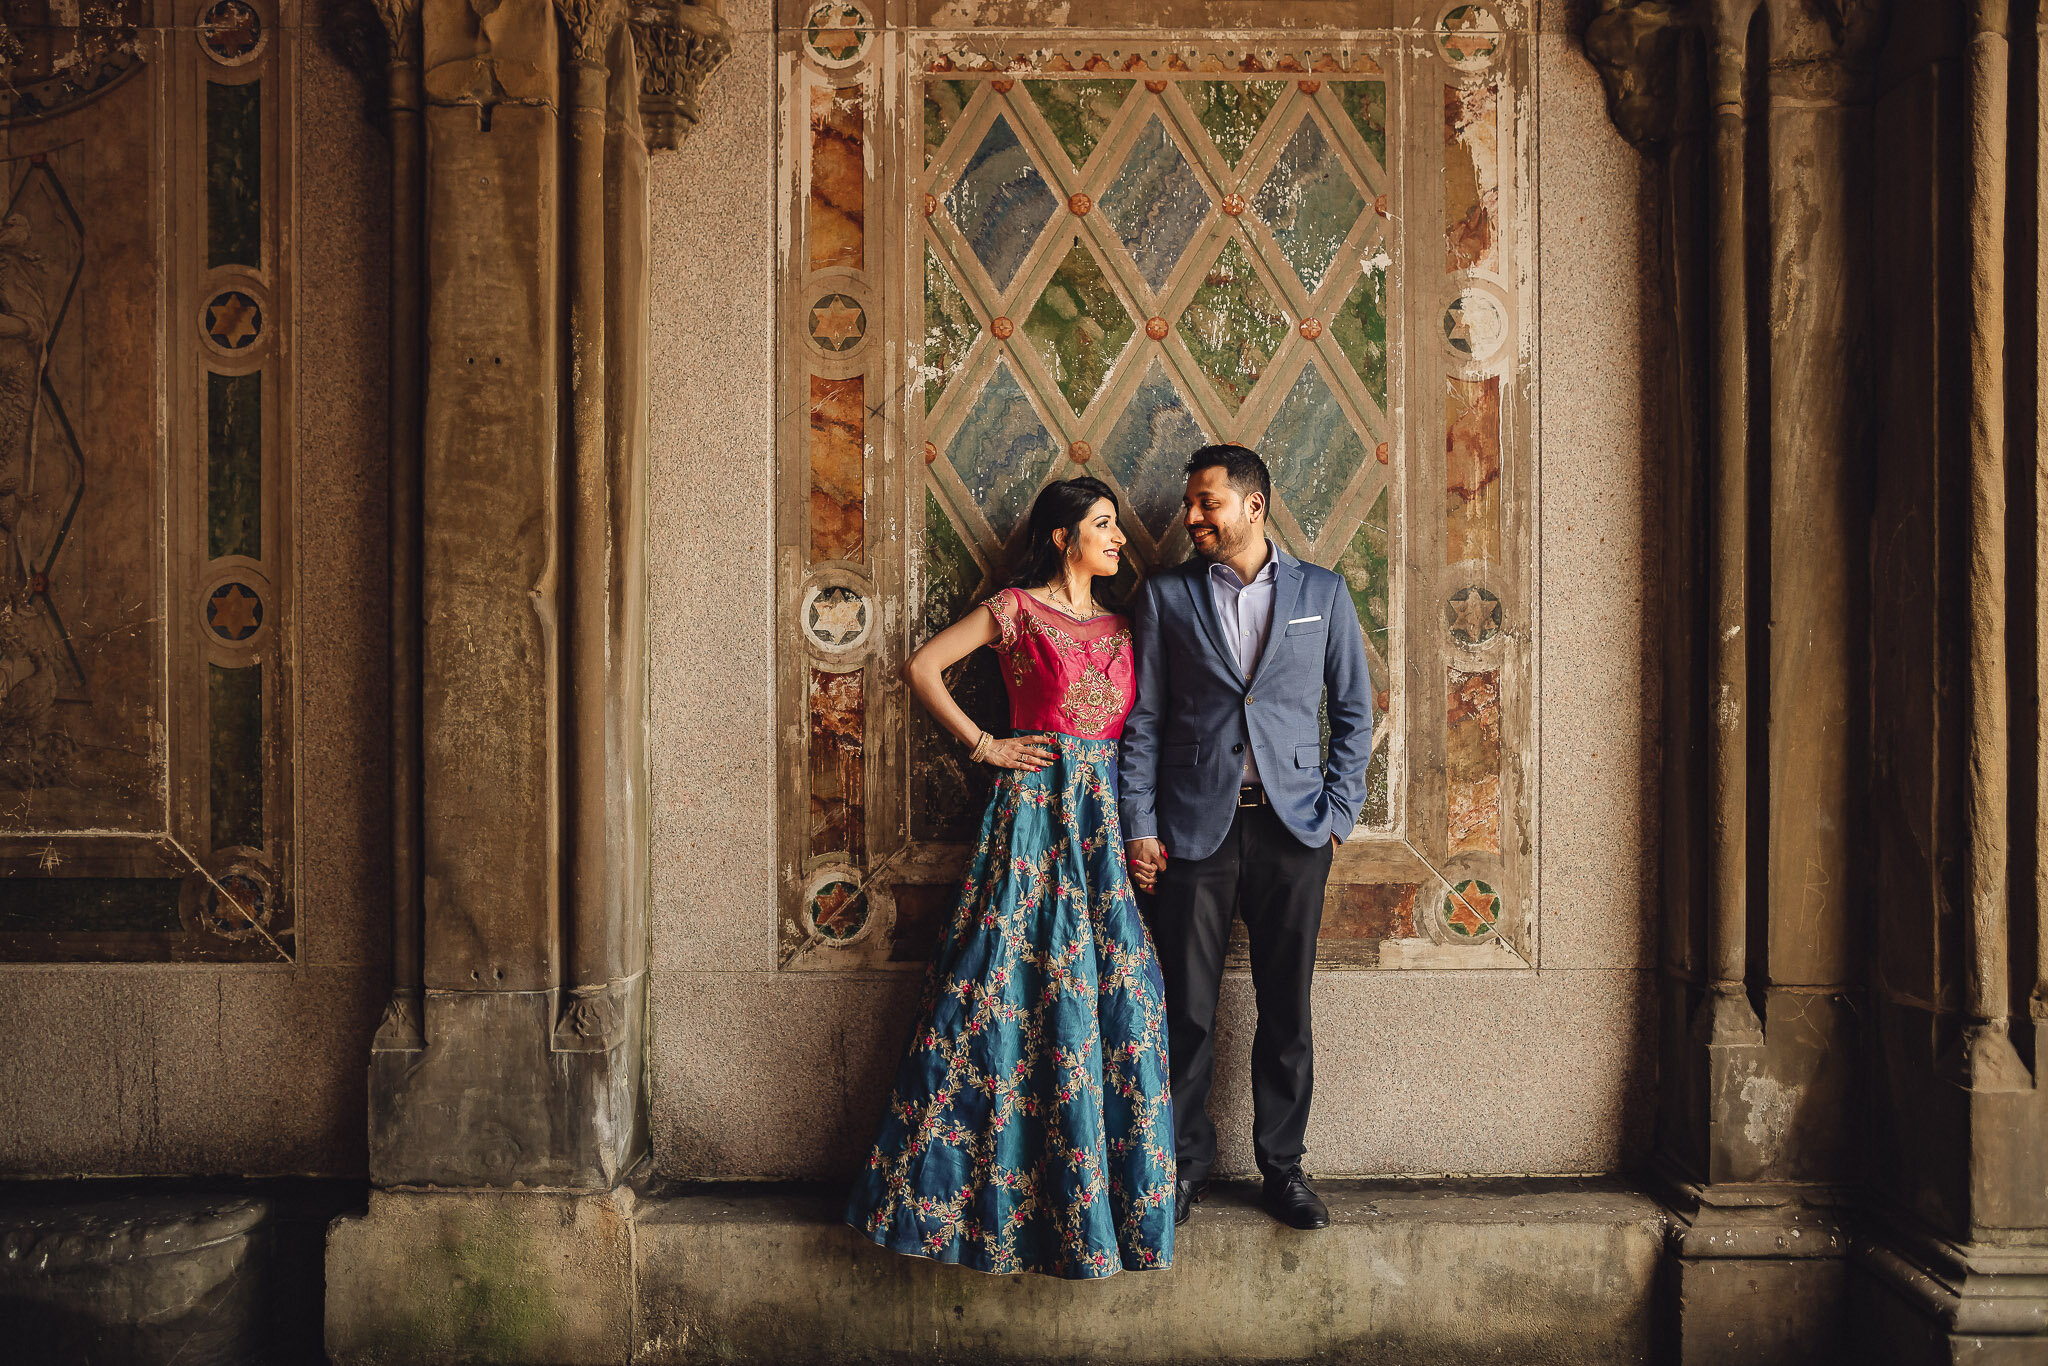 NEW YORK CITY ENGAGEMENT PHOTO SESSION AT CENTRAL PARK AND DUMBO, BROOKLYN Photographed by Top Indian Wedding Photographer Manish and Sung Photography.